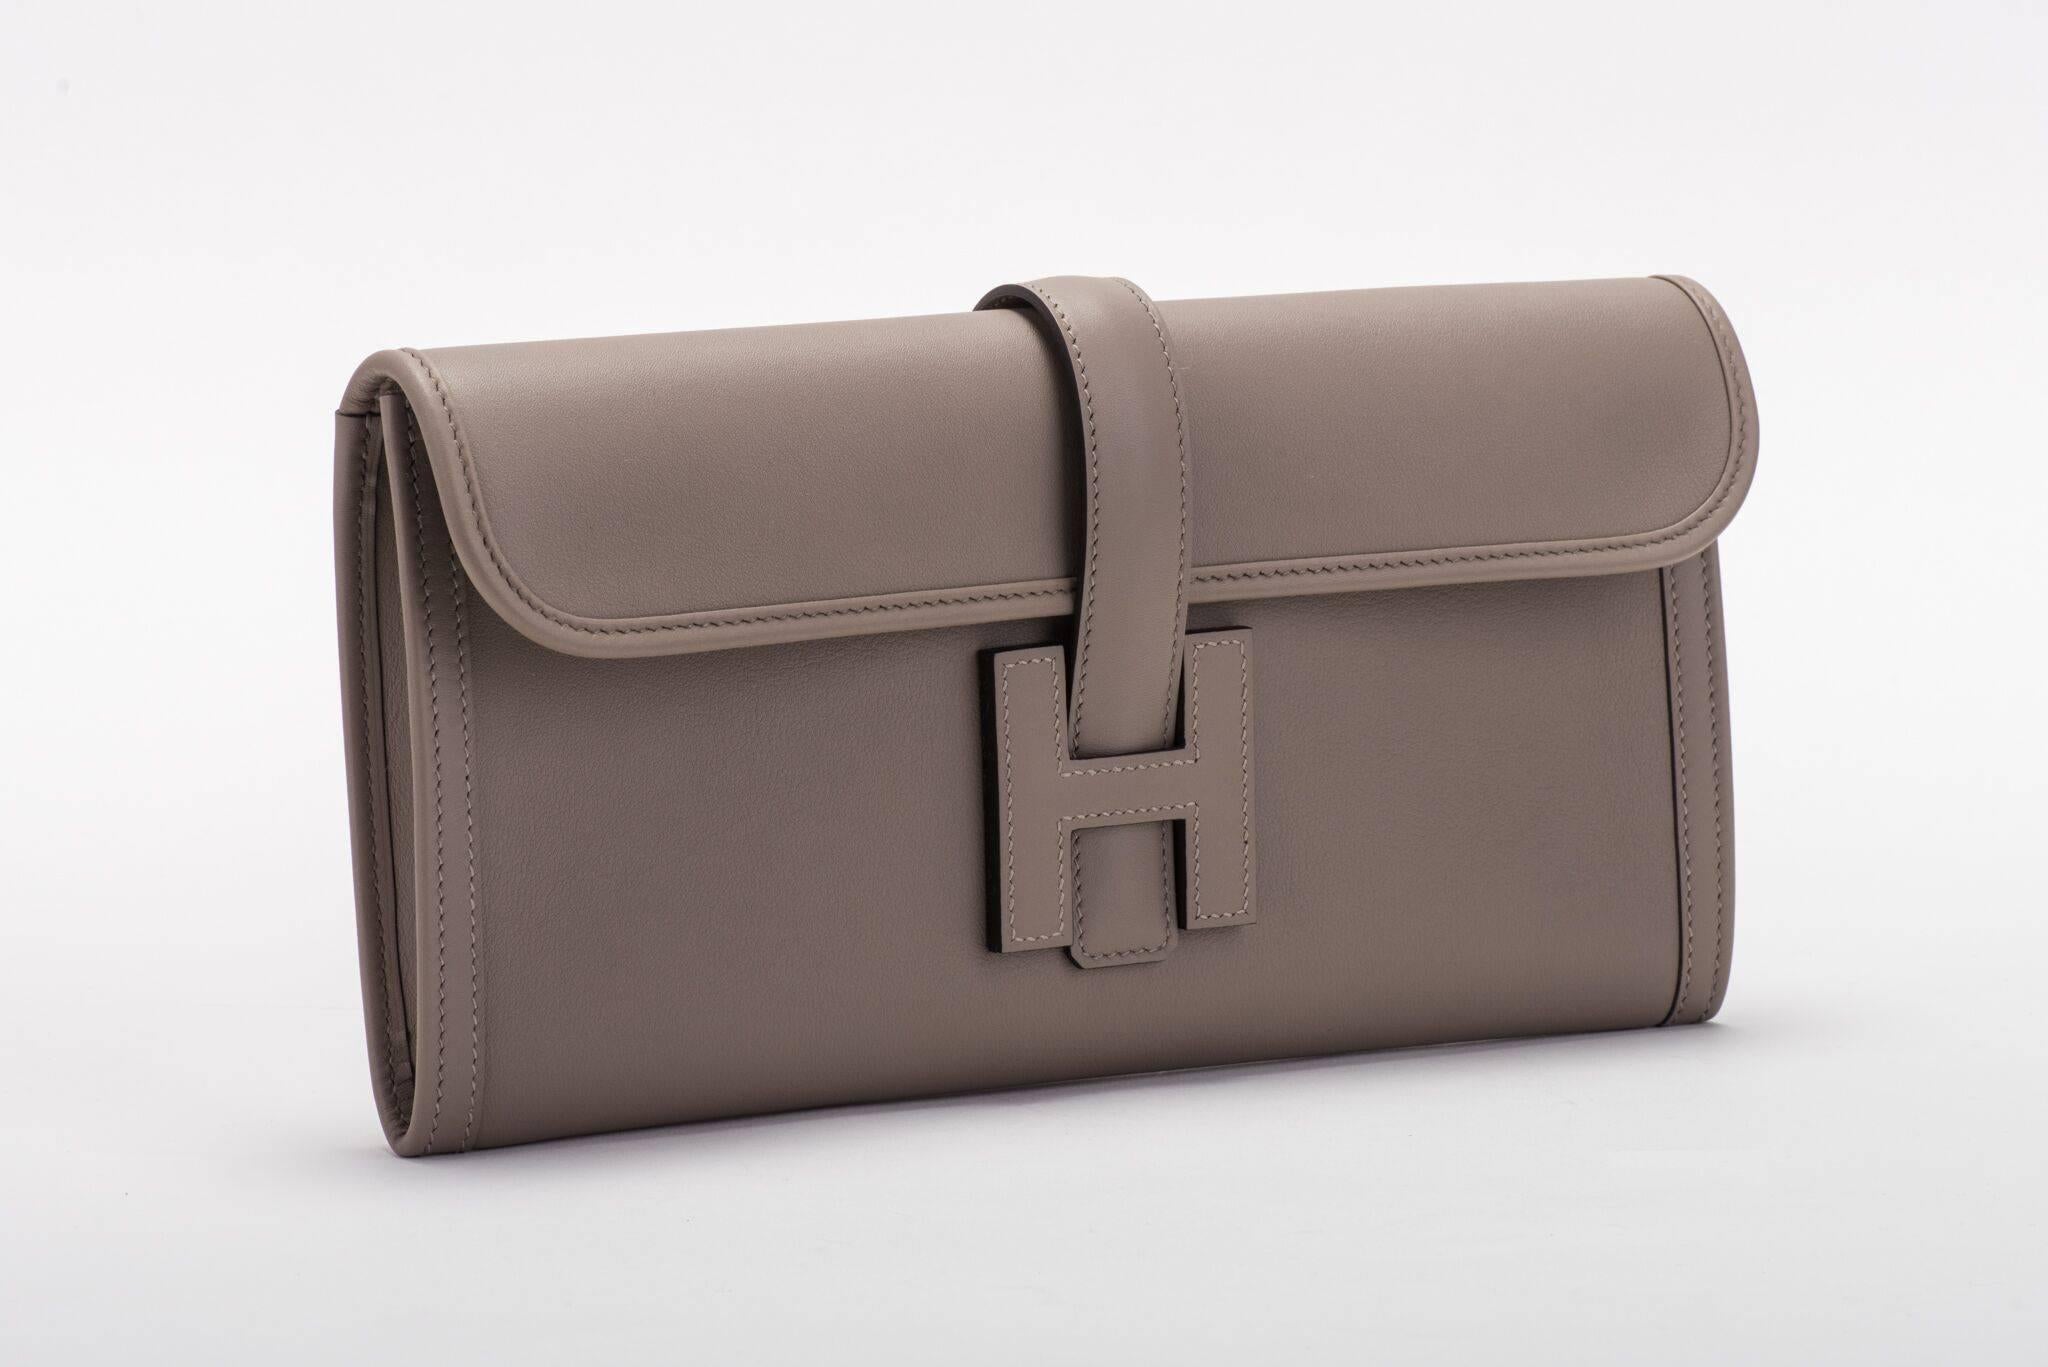 Hermes BNIB jig elan 29cm in brand new color gris asphalt in swift leather. Dated "A" for 2017. Comes with original dust cover, booklet, box , ribbon and shopping bag.